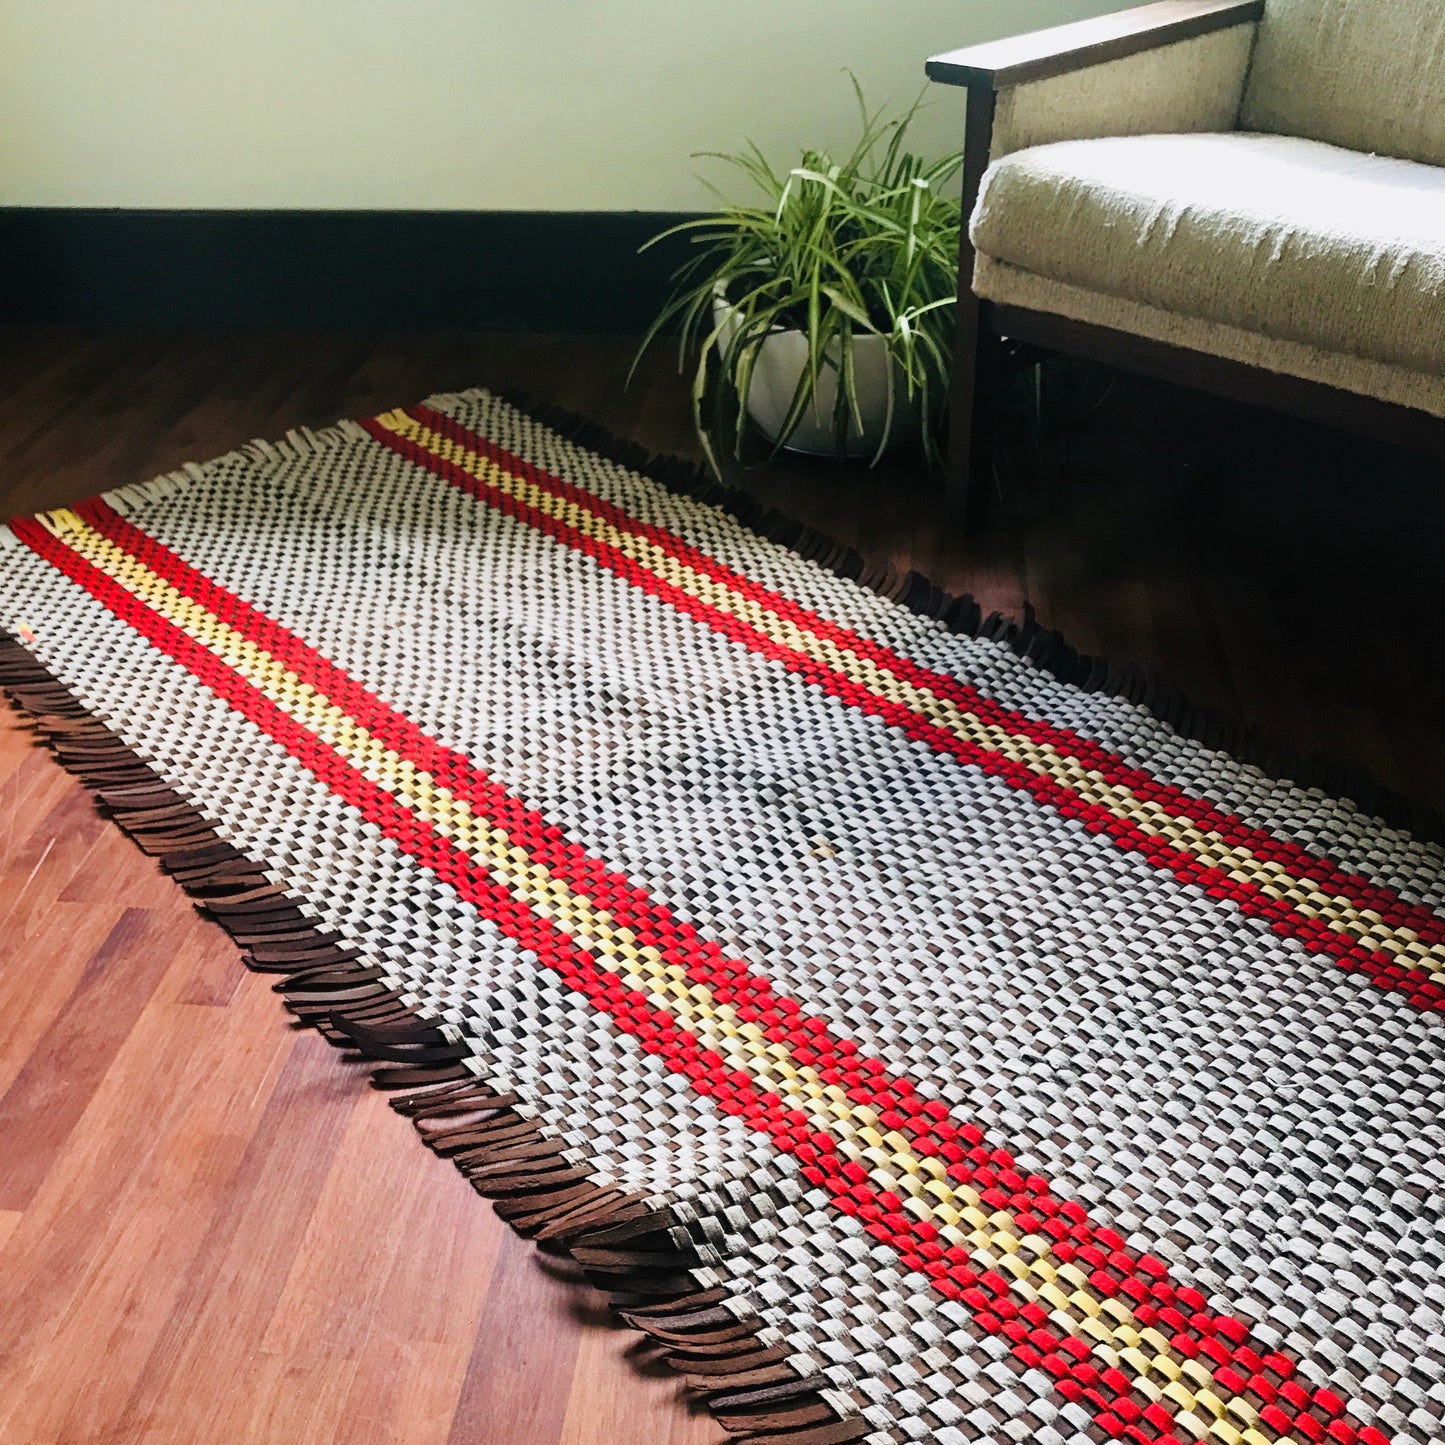 1930s Woven Brown, Cream and Yellow Felt Rug 75"x34"